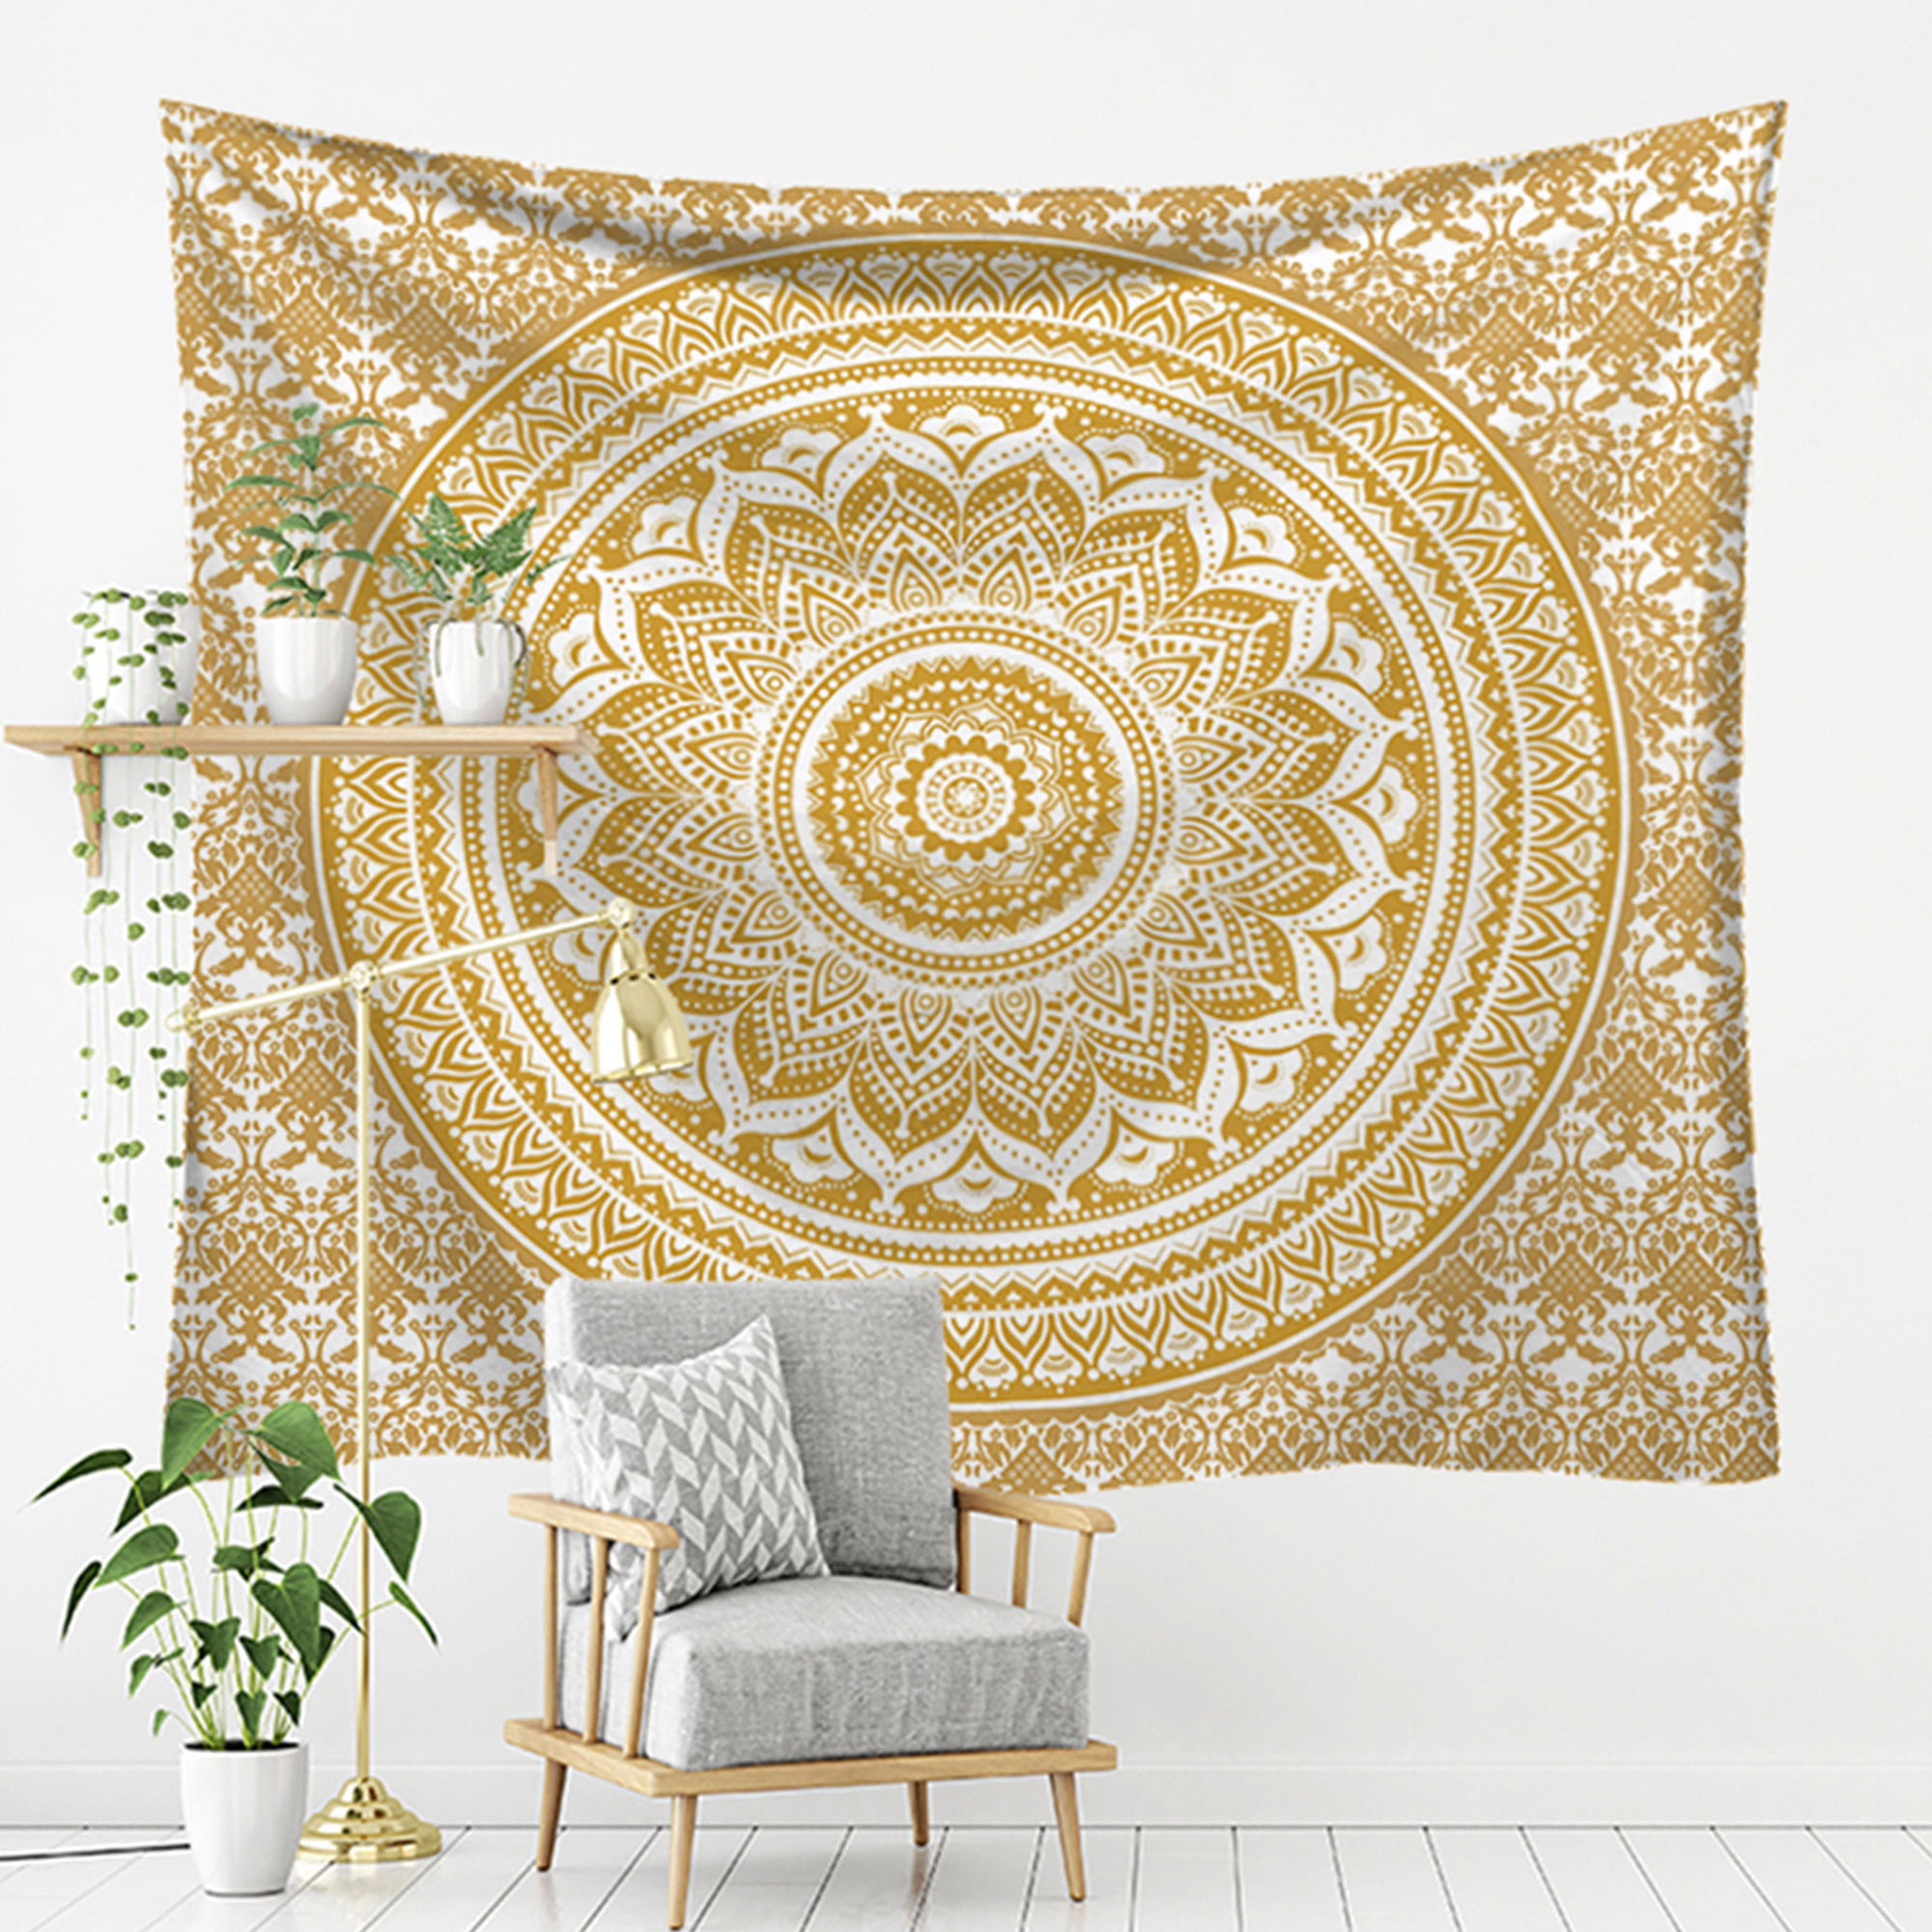 Imirell Moon Garden Tapestry 51H x 59W Inches Plants Flowers Aesthetics Mysterious Moon and Stars Dark Mystical Colorful Mandala Art Hanging Bedroom Living Room Dorm Wall Blankets Home Decor Fabric